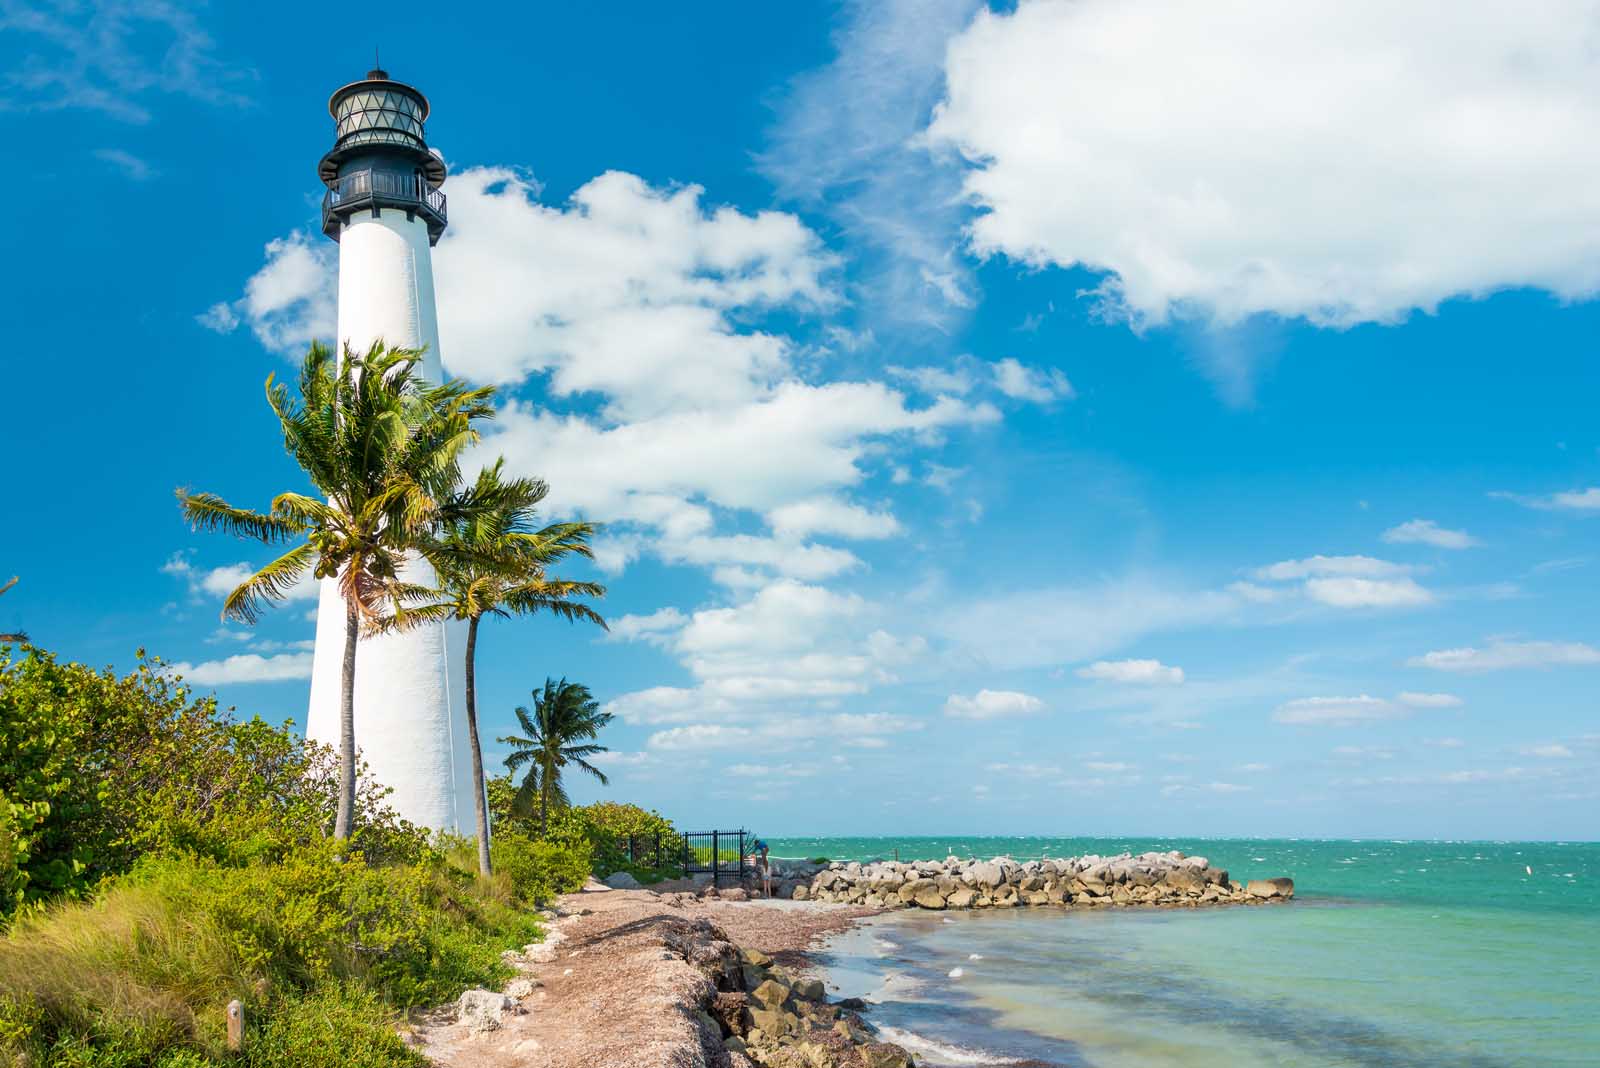 Where to stay in Miami Key Biscayne